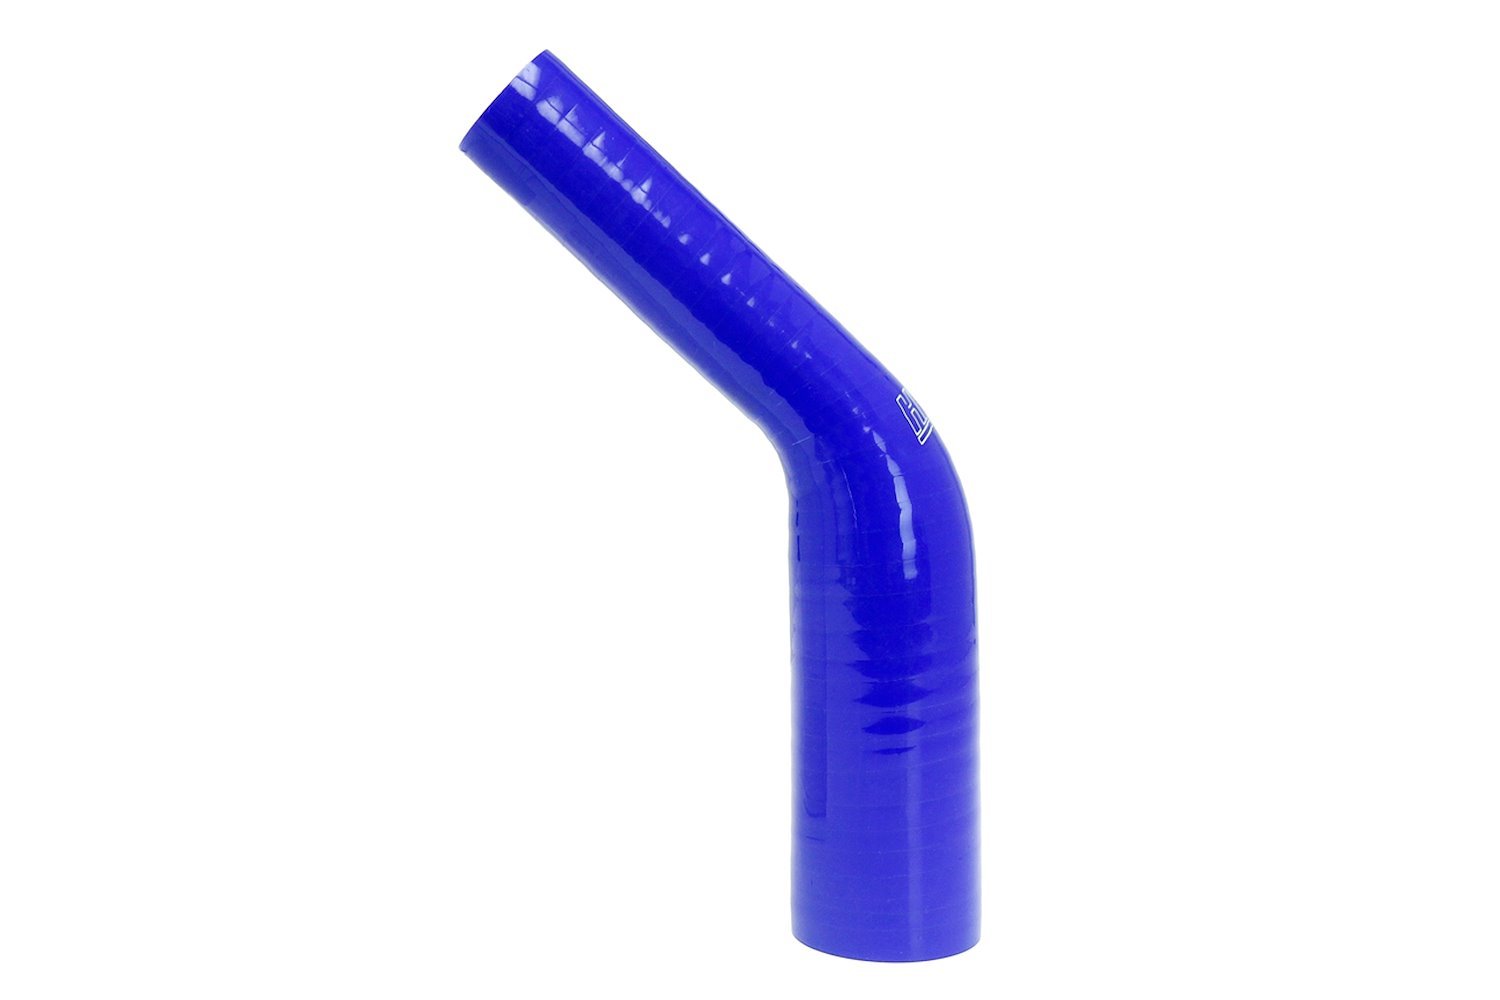 HTSER45-138-150-BLUE Silicone 45-Degree Elbow Hose, High-Temp 4-Ply Reinforced, 1-3/8 in. - 1-1/2 in. ID, Blue